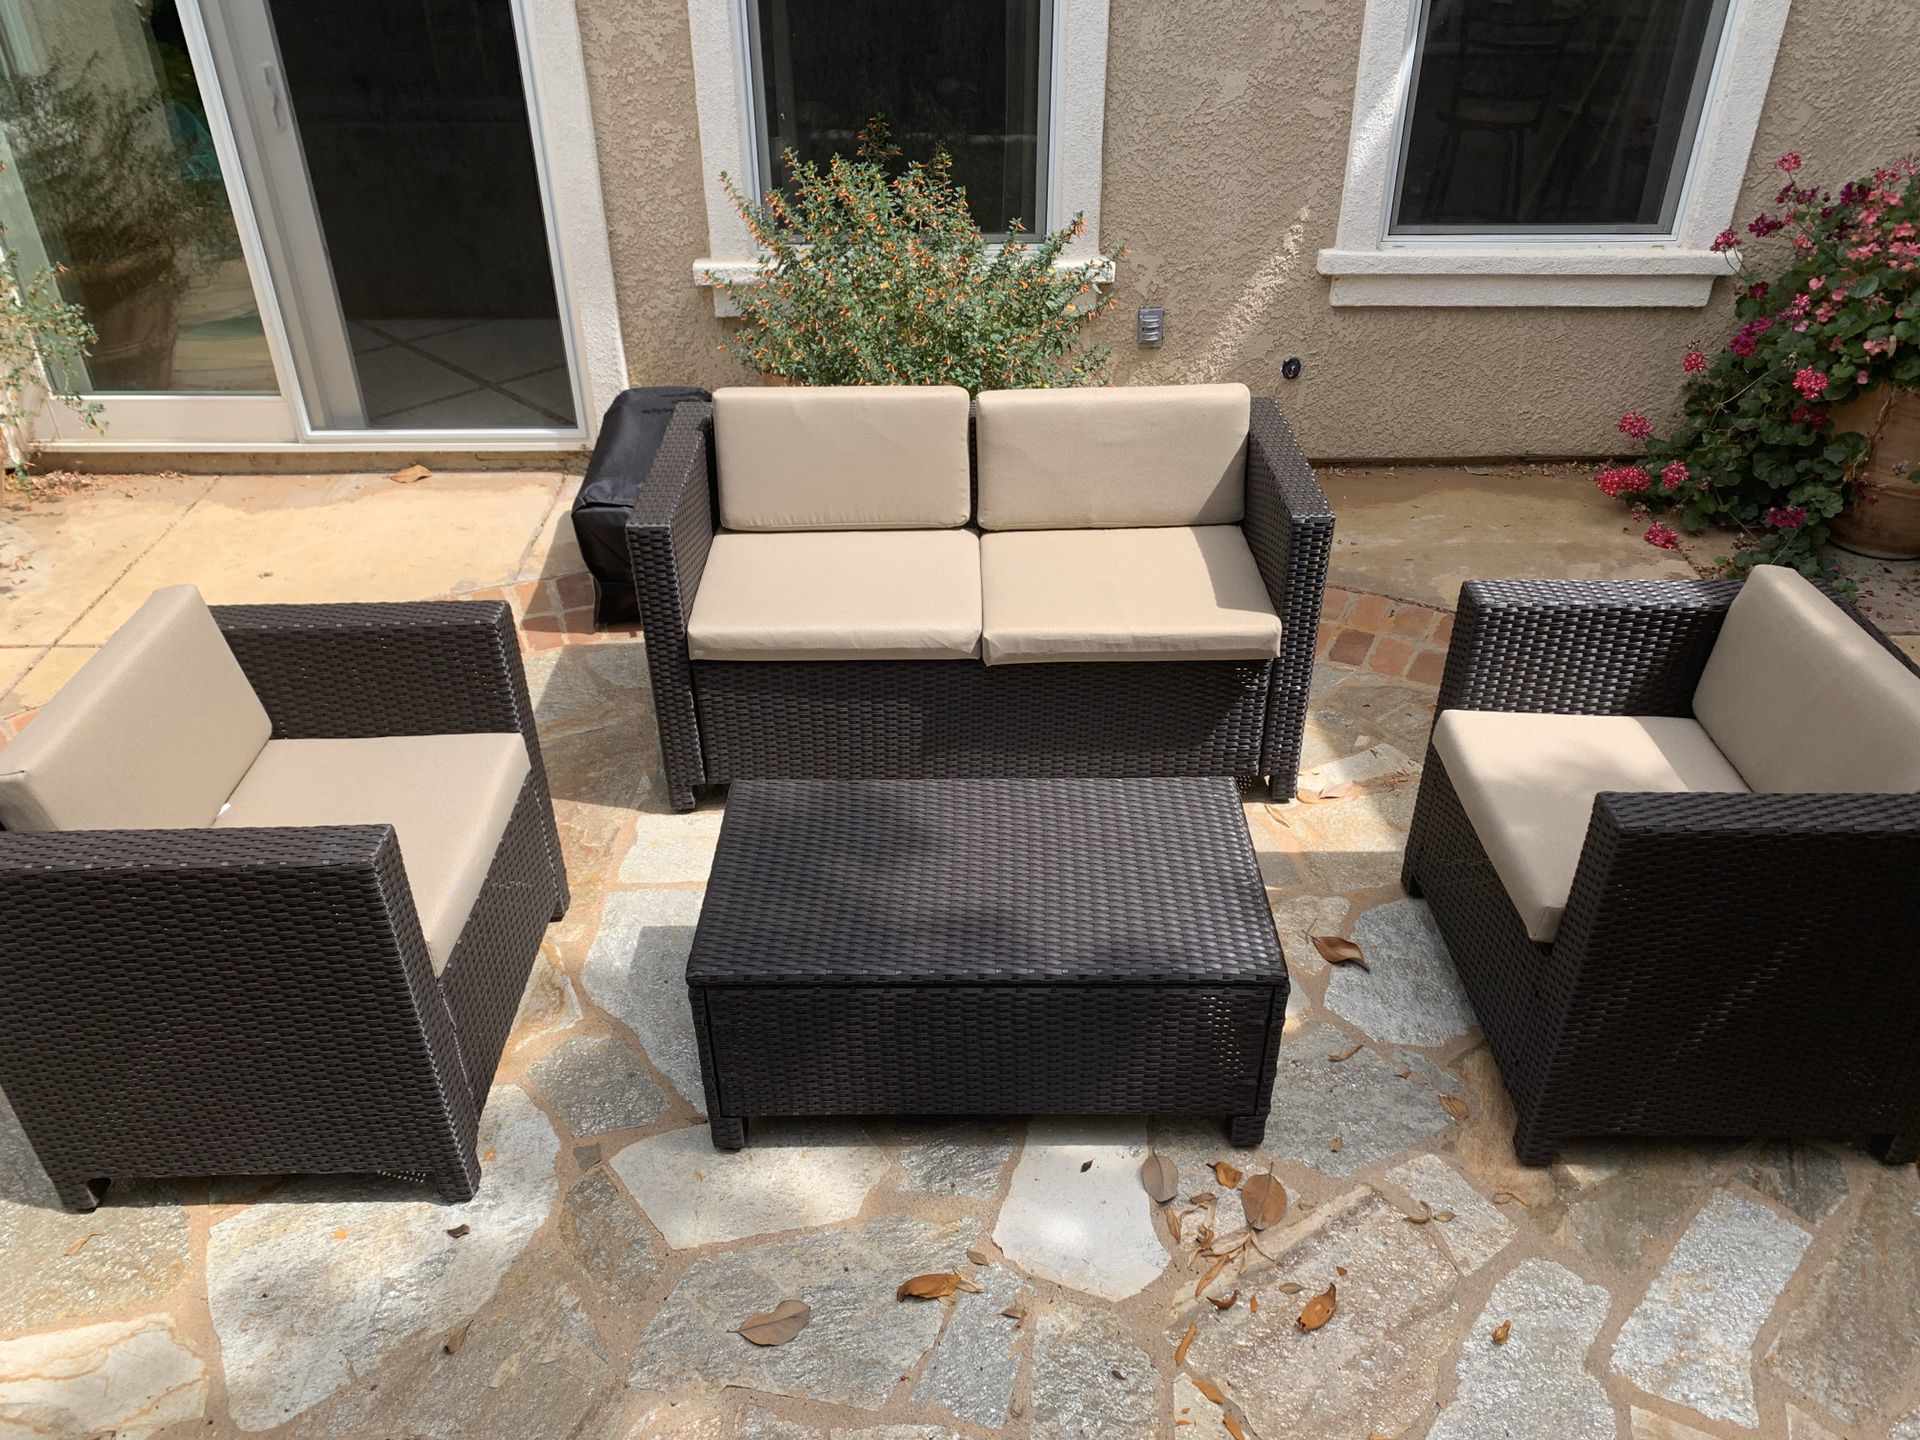 New, just assembled 4 piece Rattan Sofa seating group with cushions